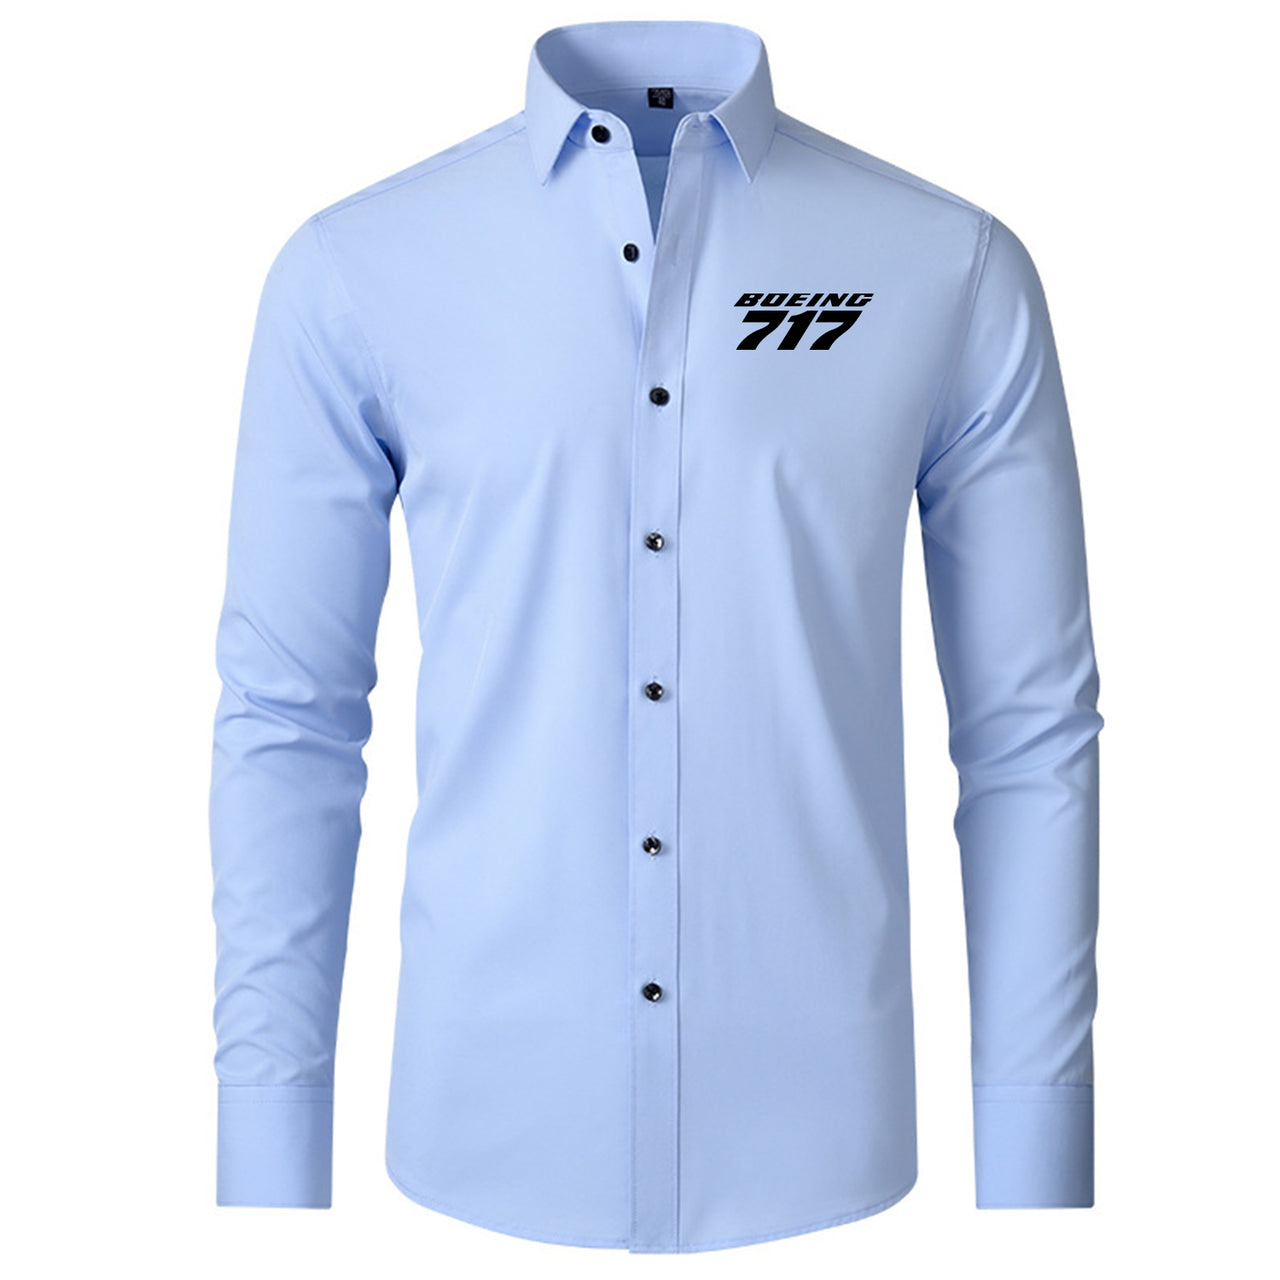 Boeing 717 & Text Designed Long Sleeve Shirts